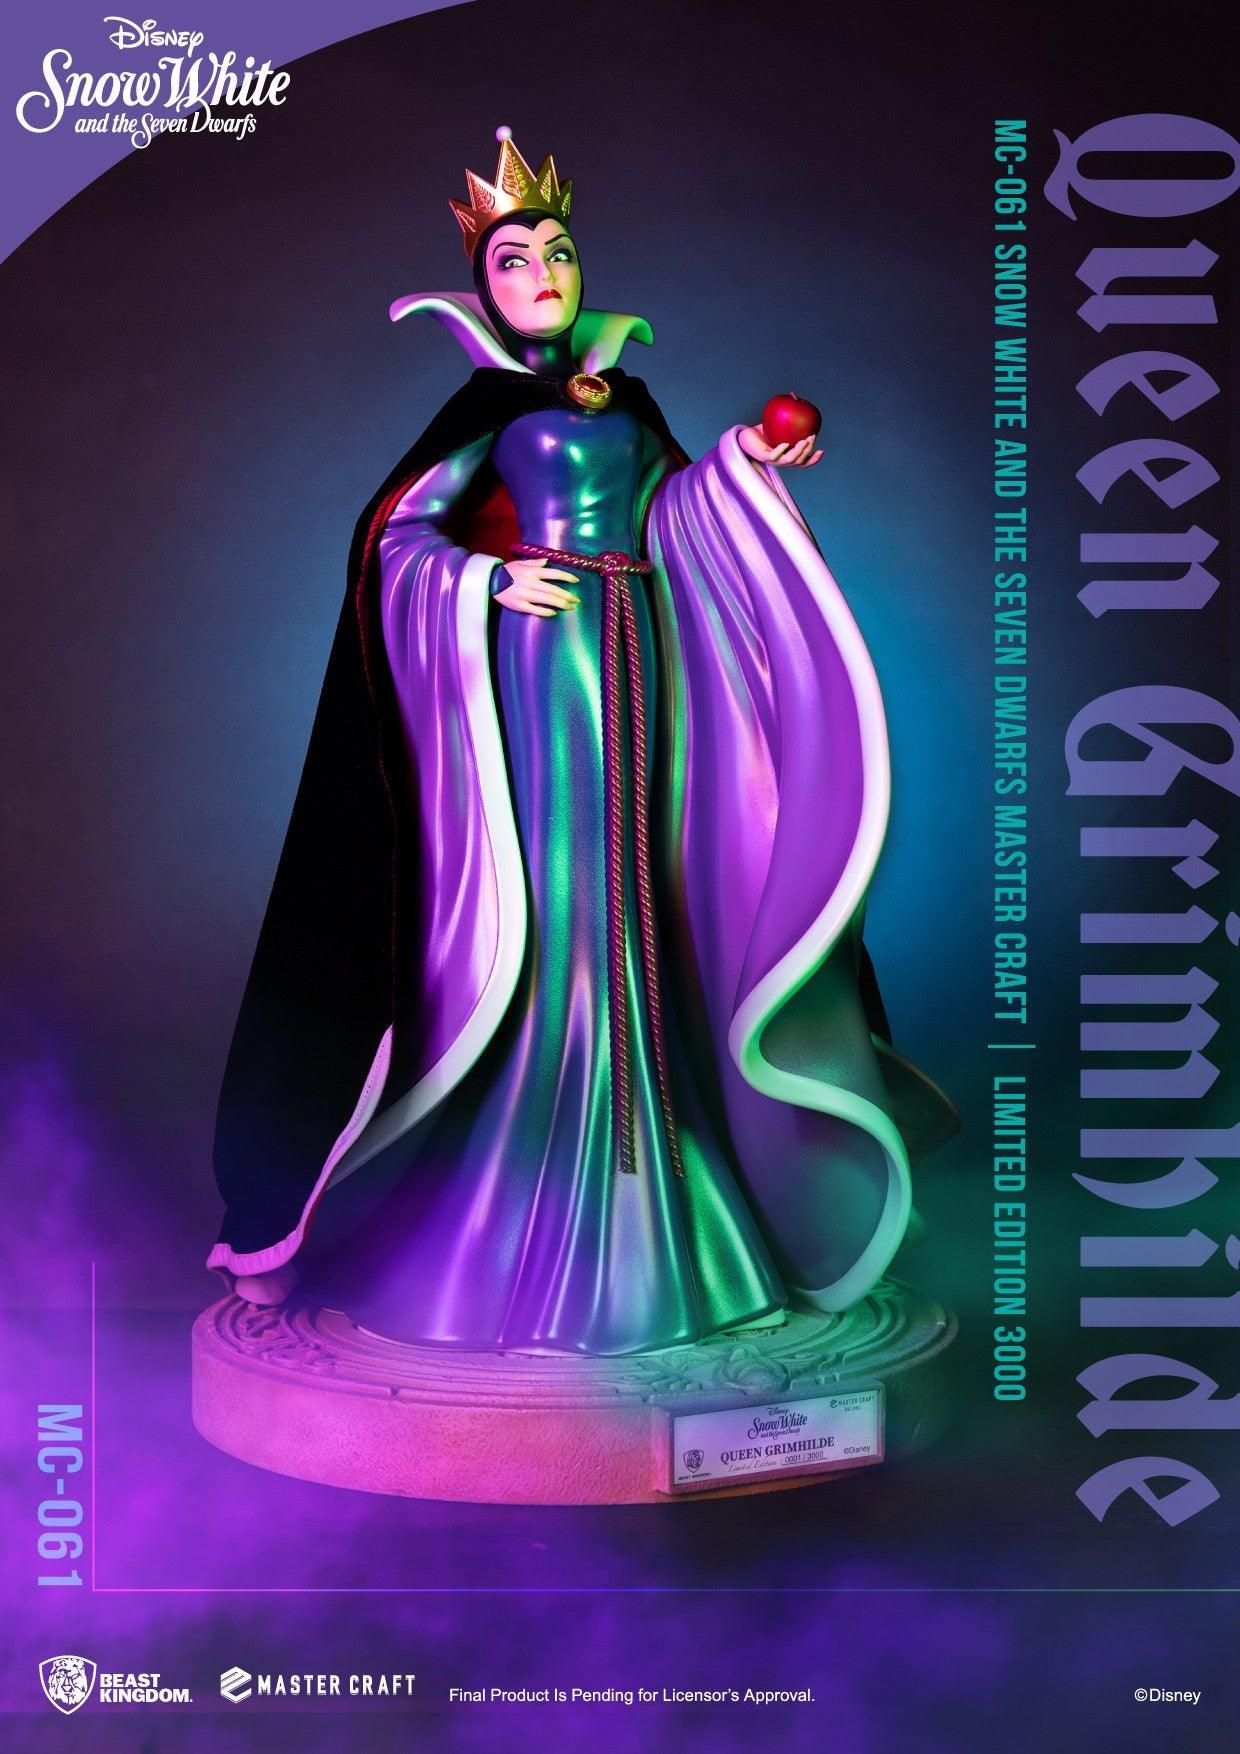 Beast Kingdom Master Craft Snow White and the Seven Dwarfs Queen Grimhilde Collectables / Figurines / Beast Kingdom by Beast Kingdom | Titan Pop Culture